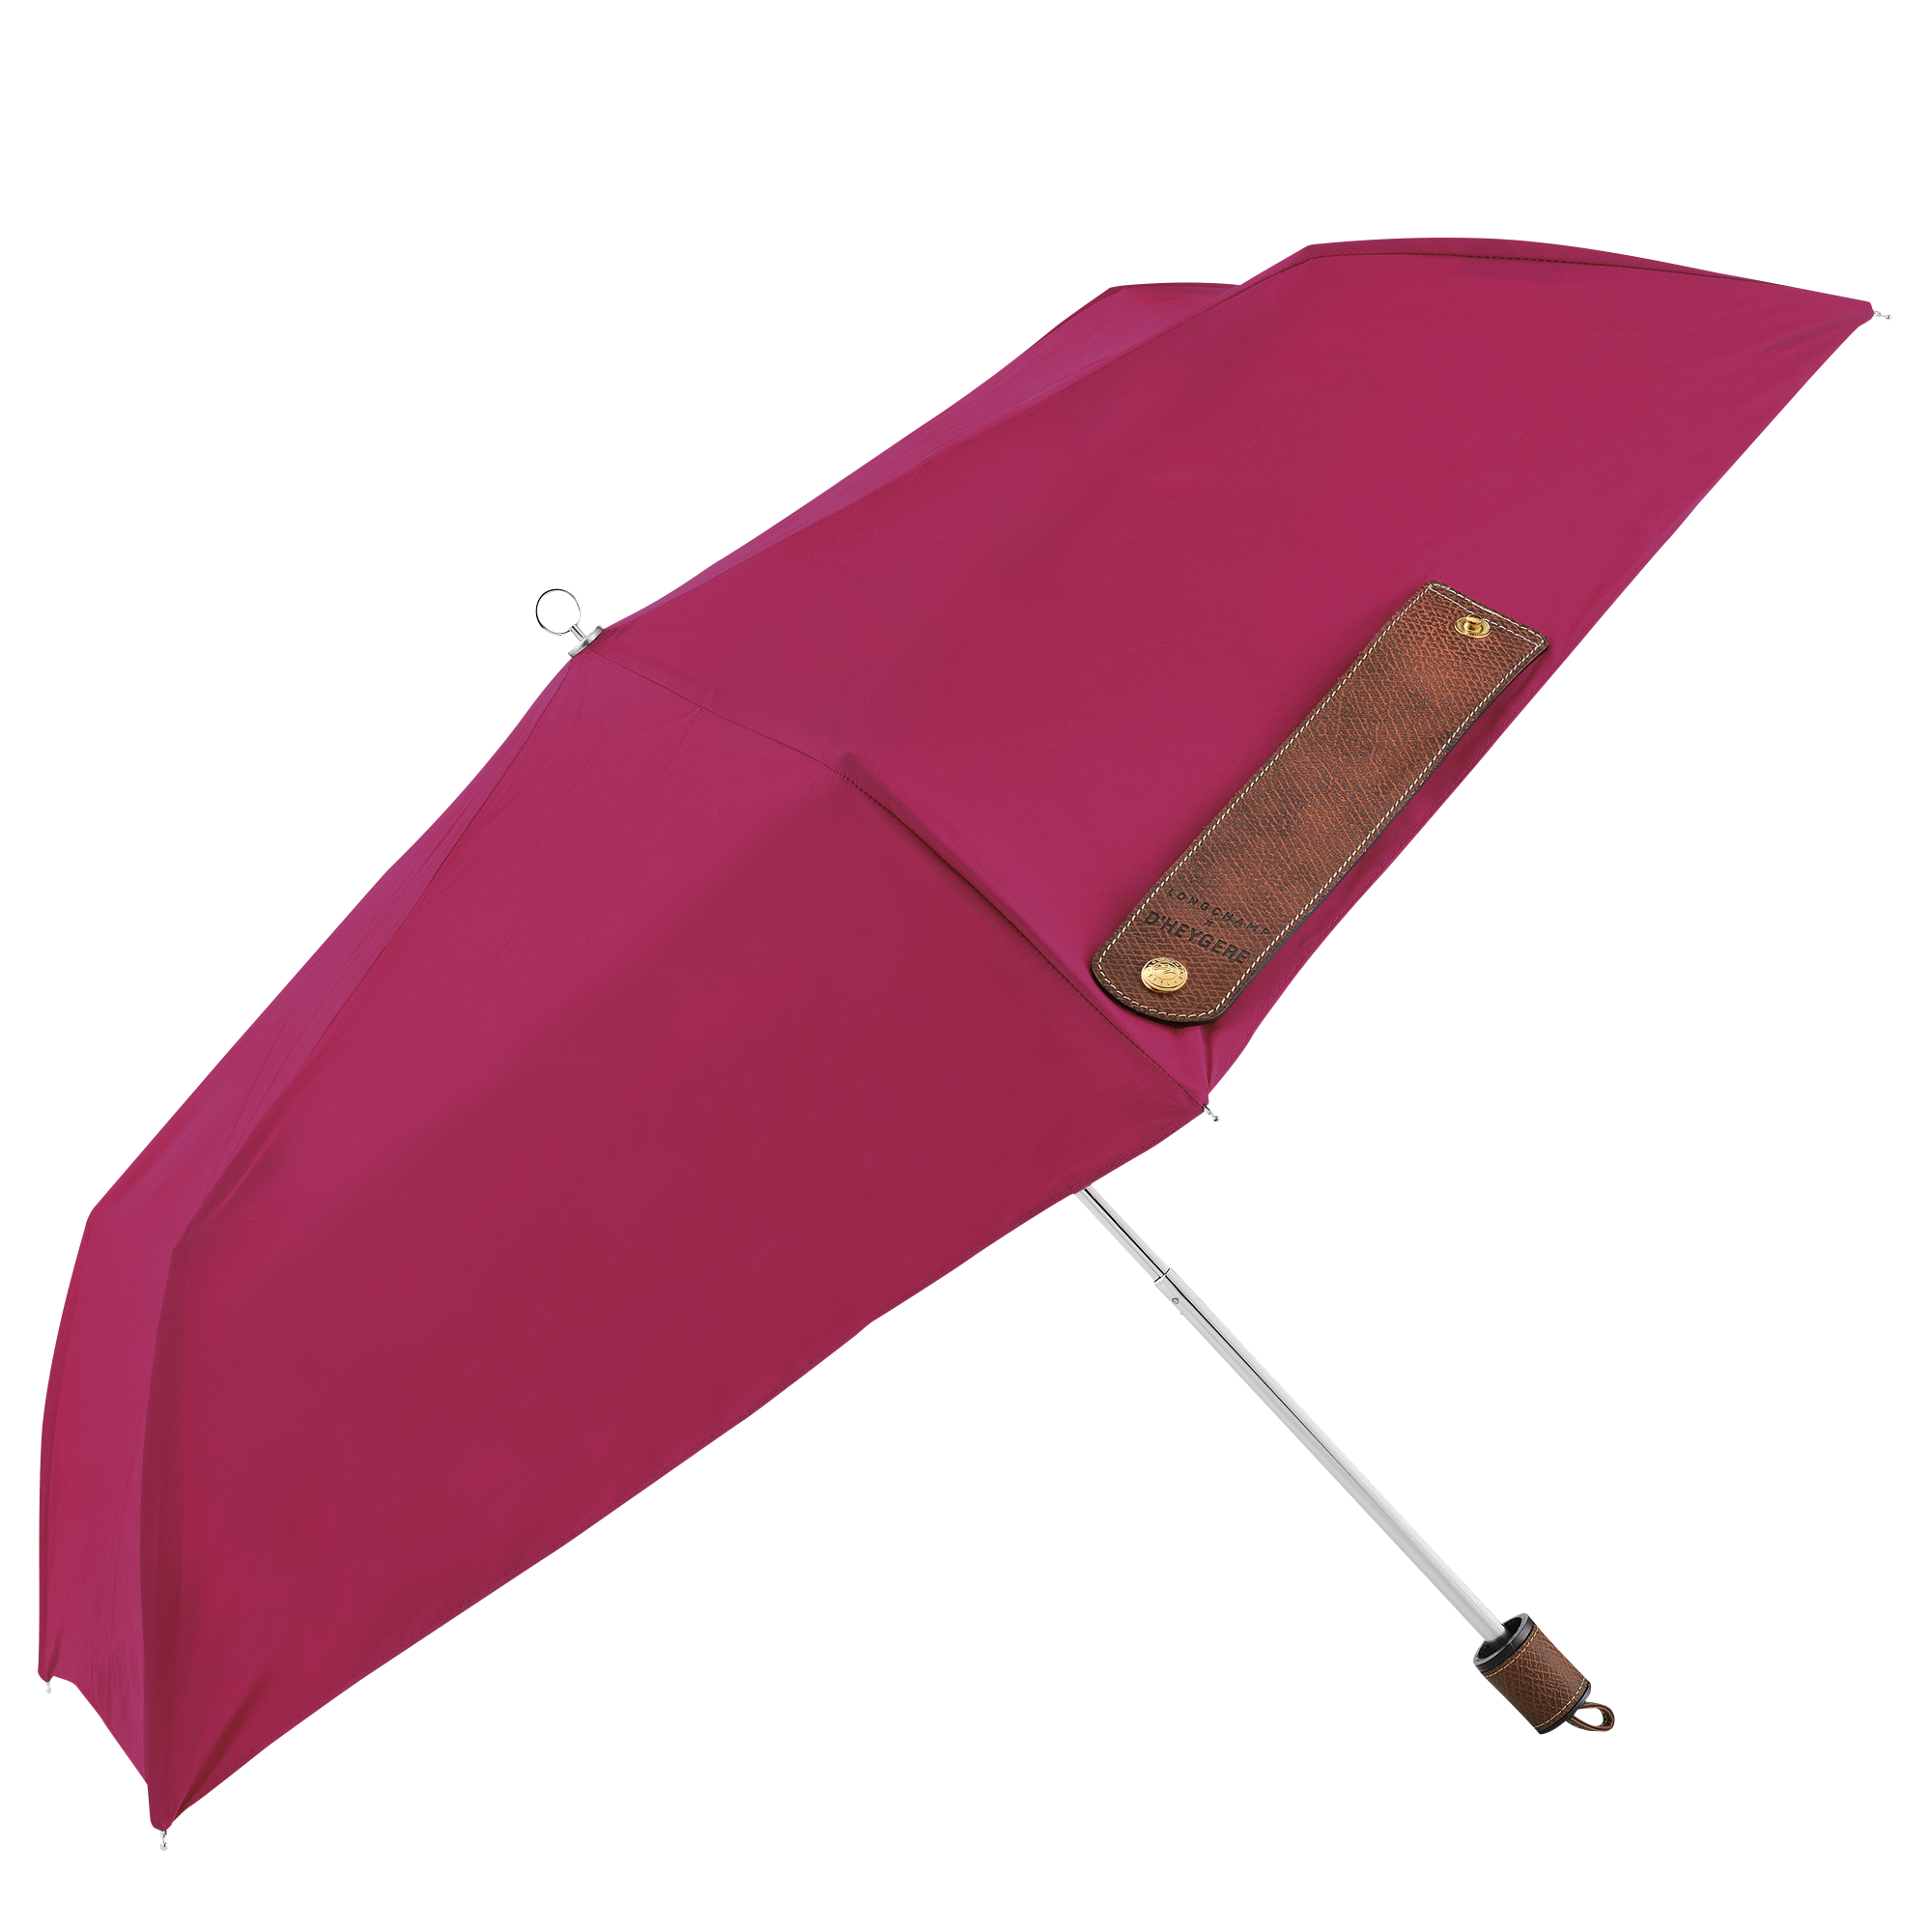 Longchamp X D_heygere pink umbrella with strap  Php 12,500.png